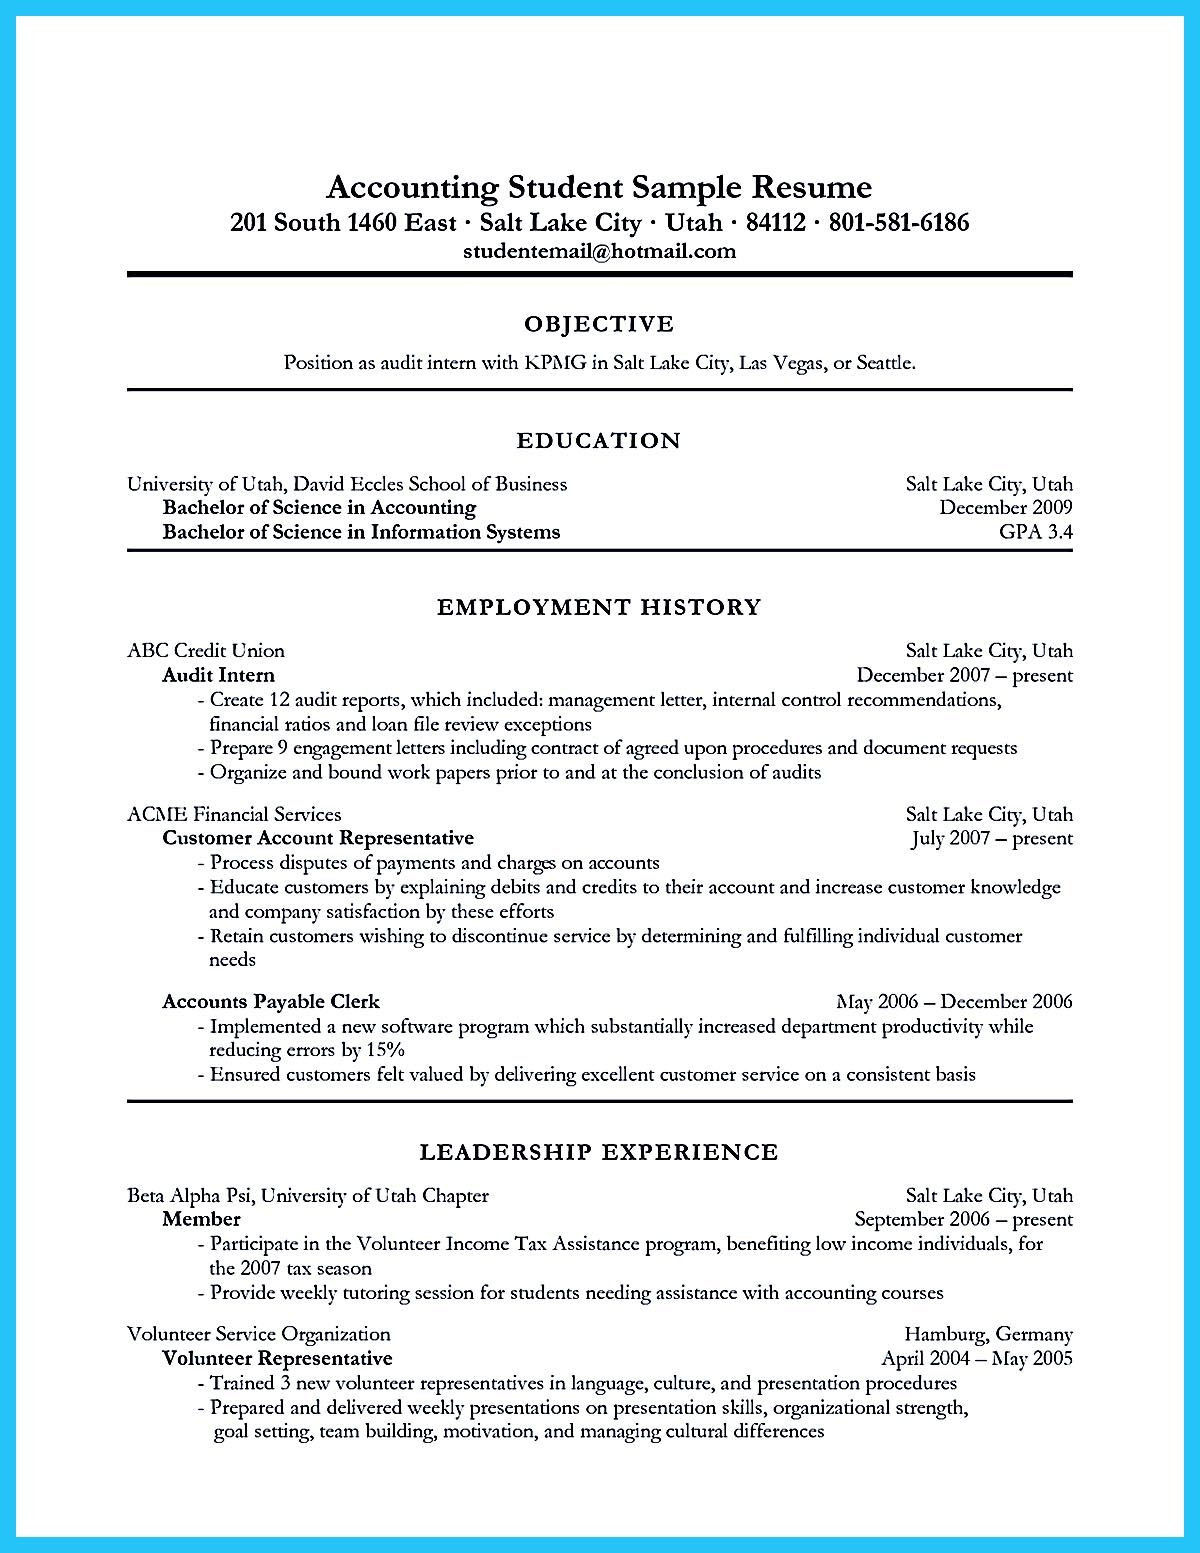 Sample Resume Objective Statements for Accounting Awesome Accounting Student Resume with No Experience Resume …